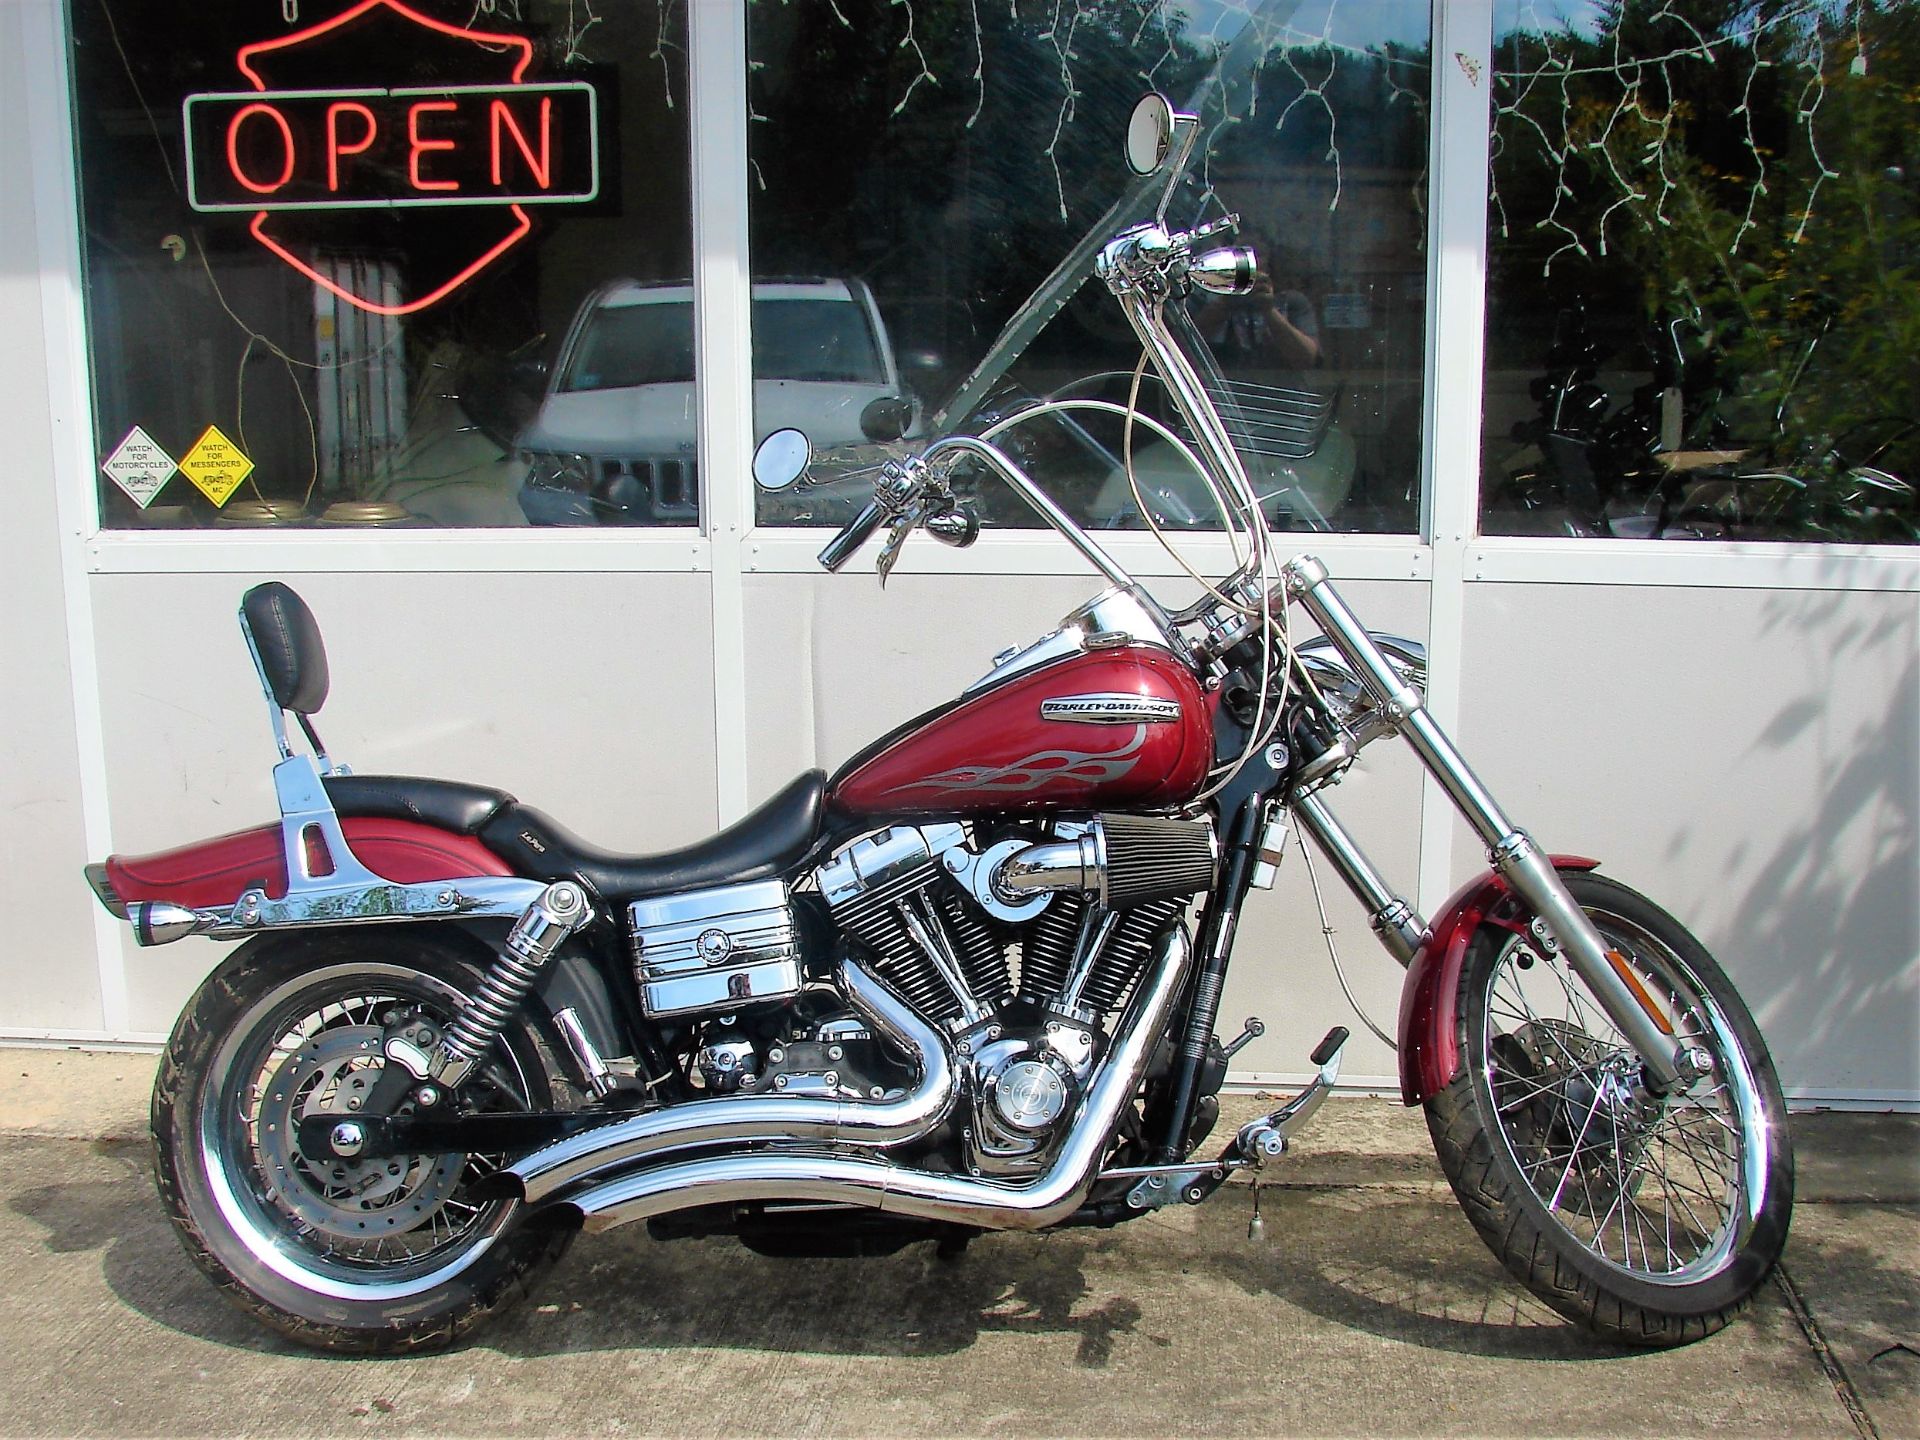 Used 2006 Harley Davidson Fxdwg Dyna Wide Glide Motorcycles In Williamstown Nj 8 19 21 02 Red